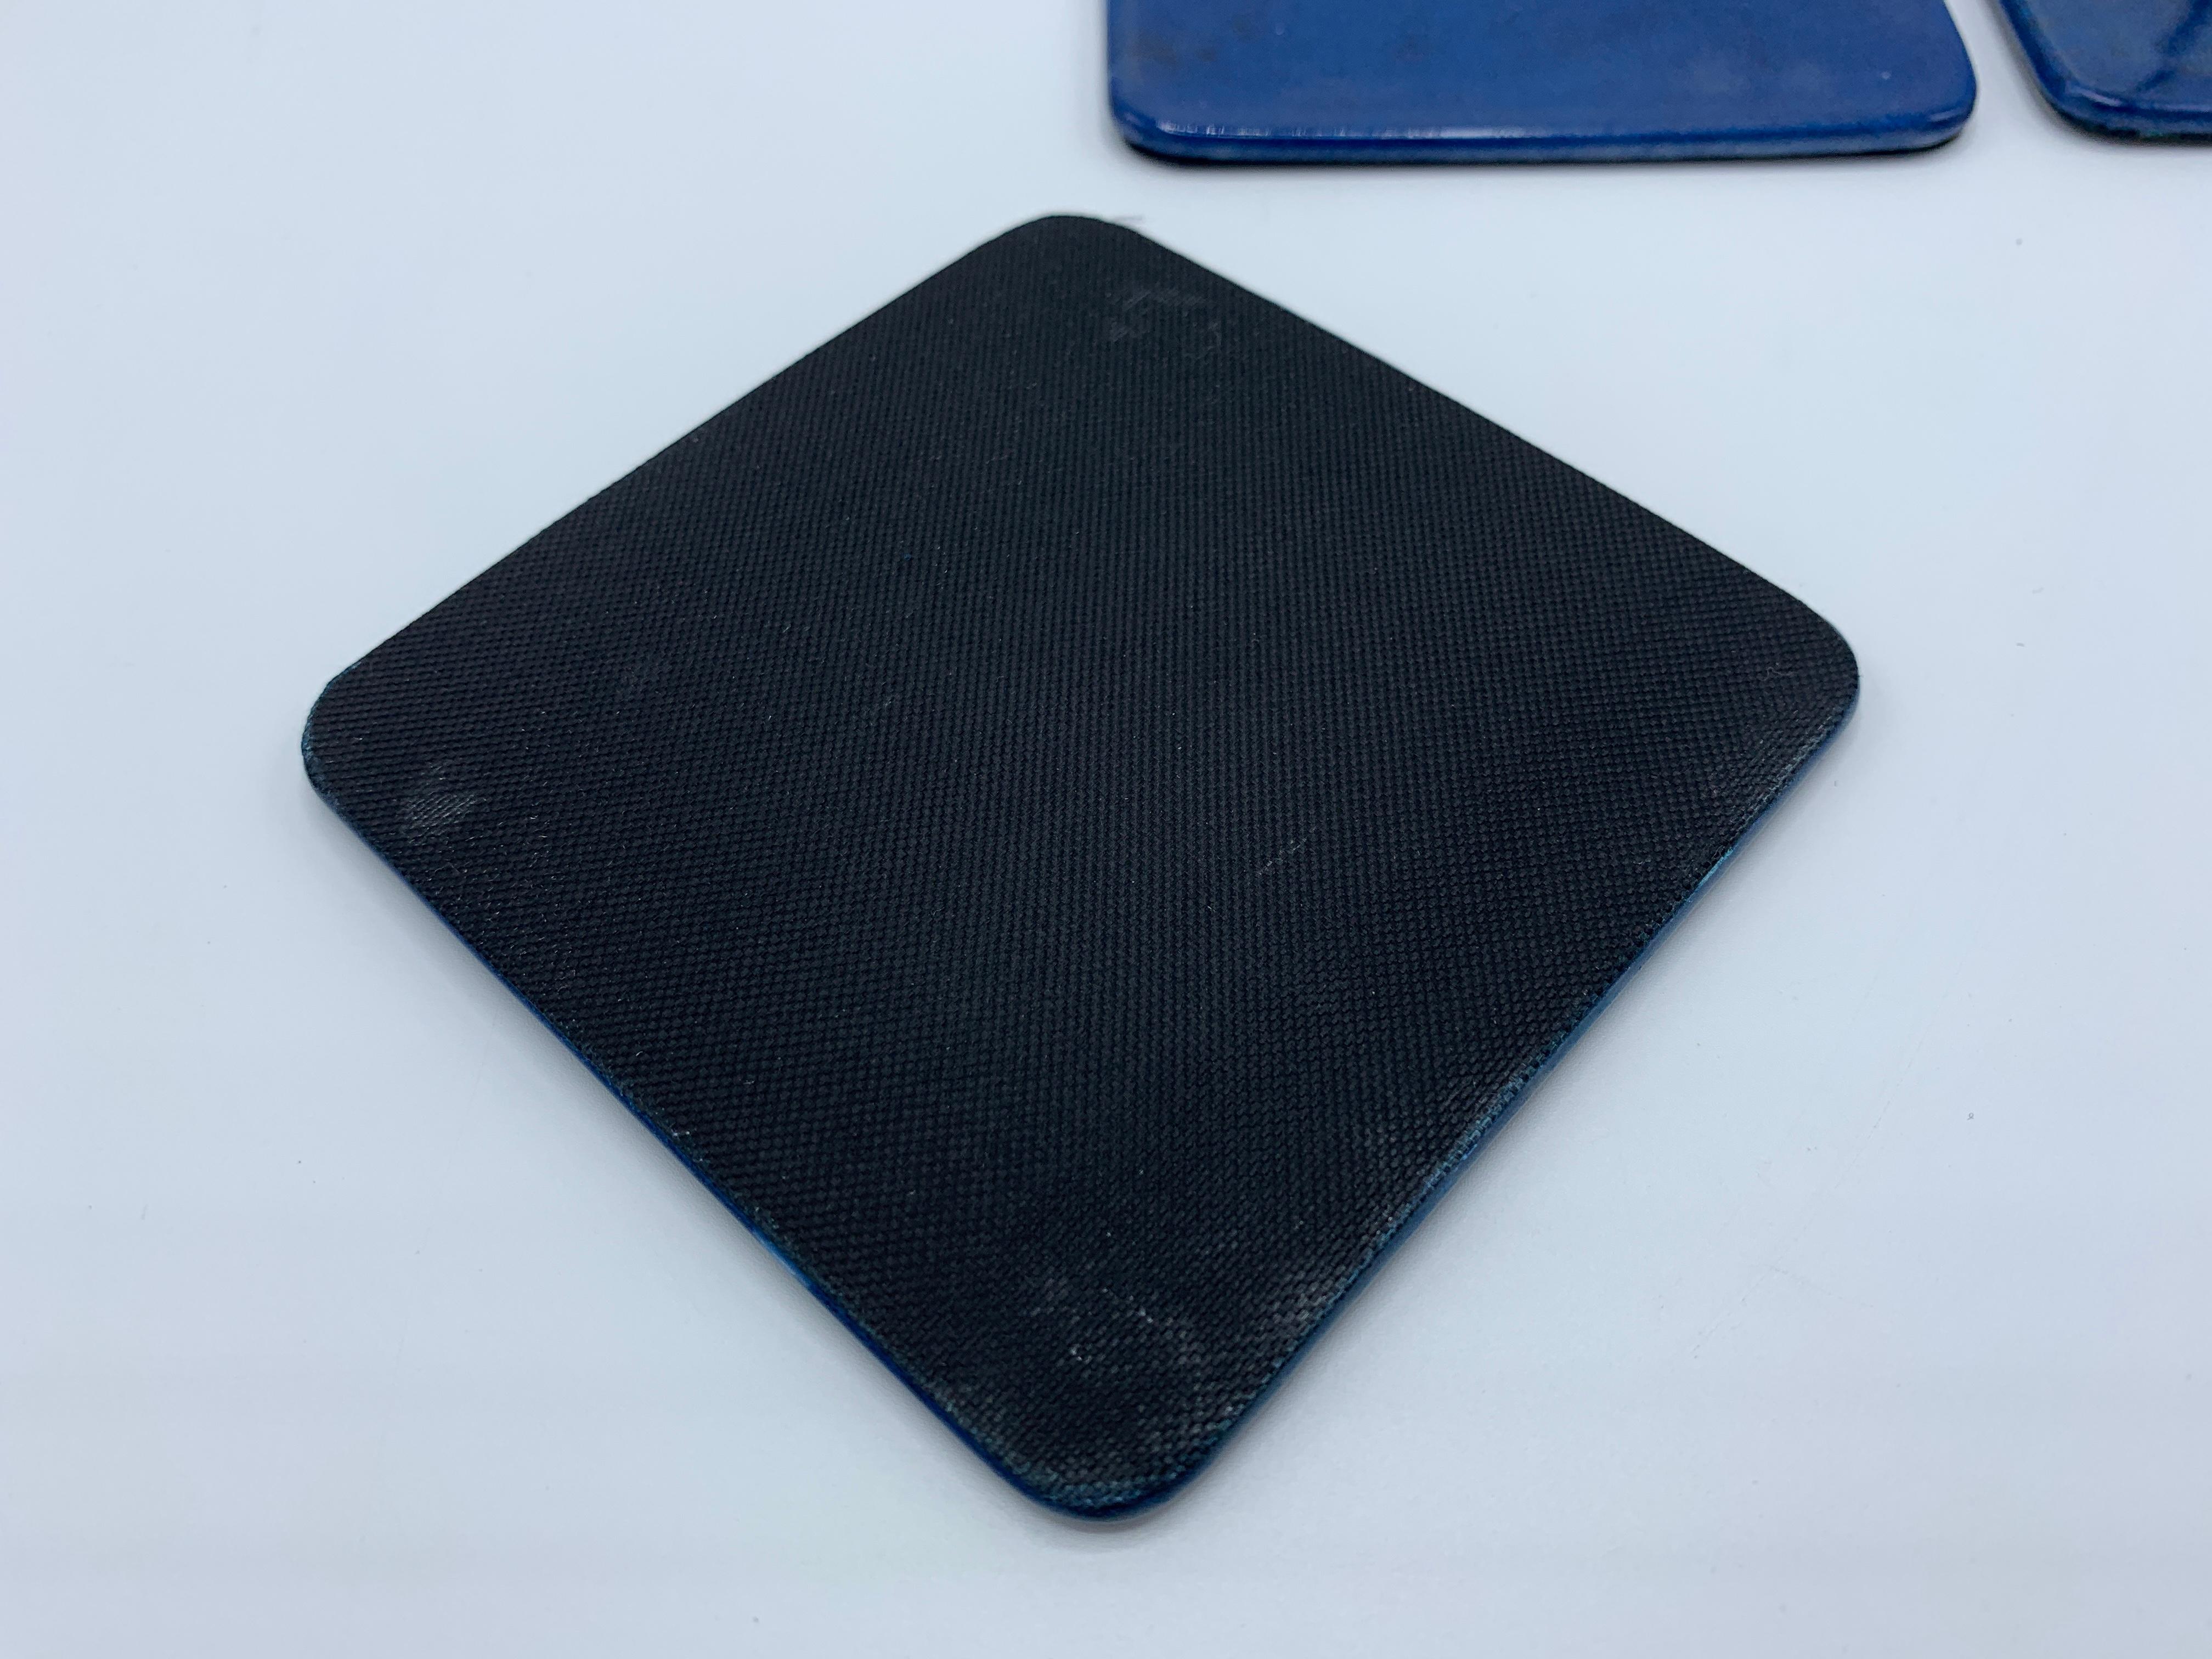 Aldo Tura Style Blue Lacquered Goatskin Coasters with Hide Tray, Set of 6 3